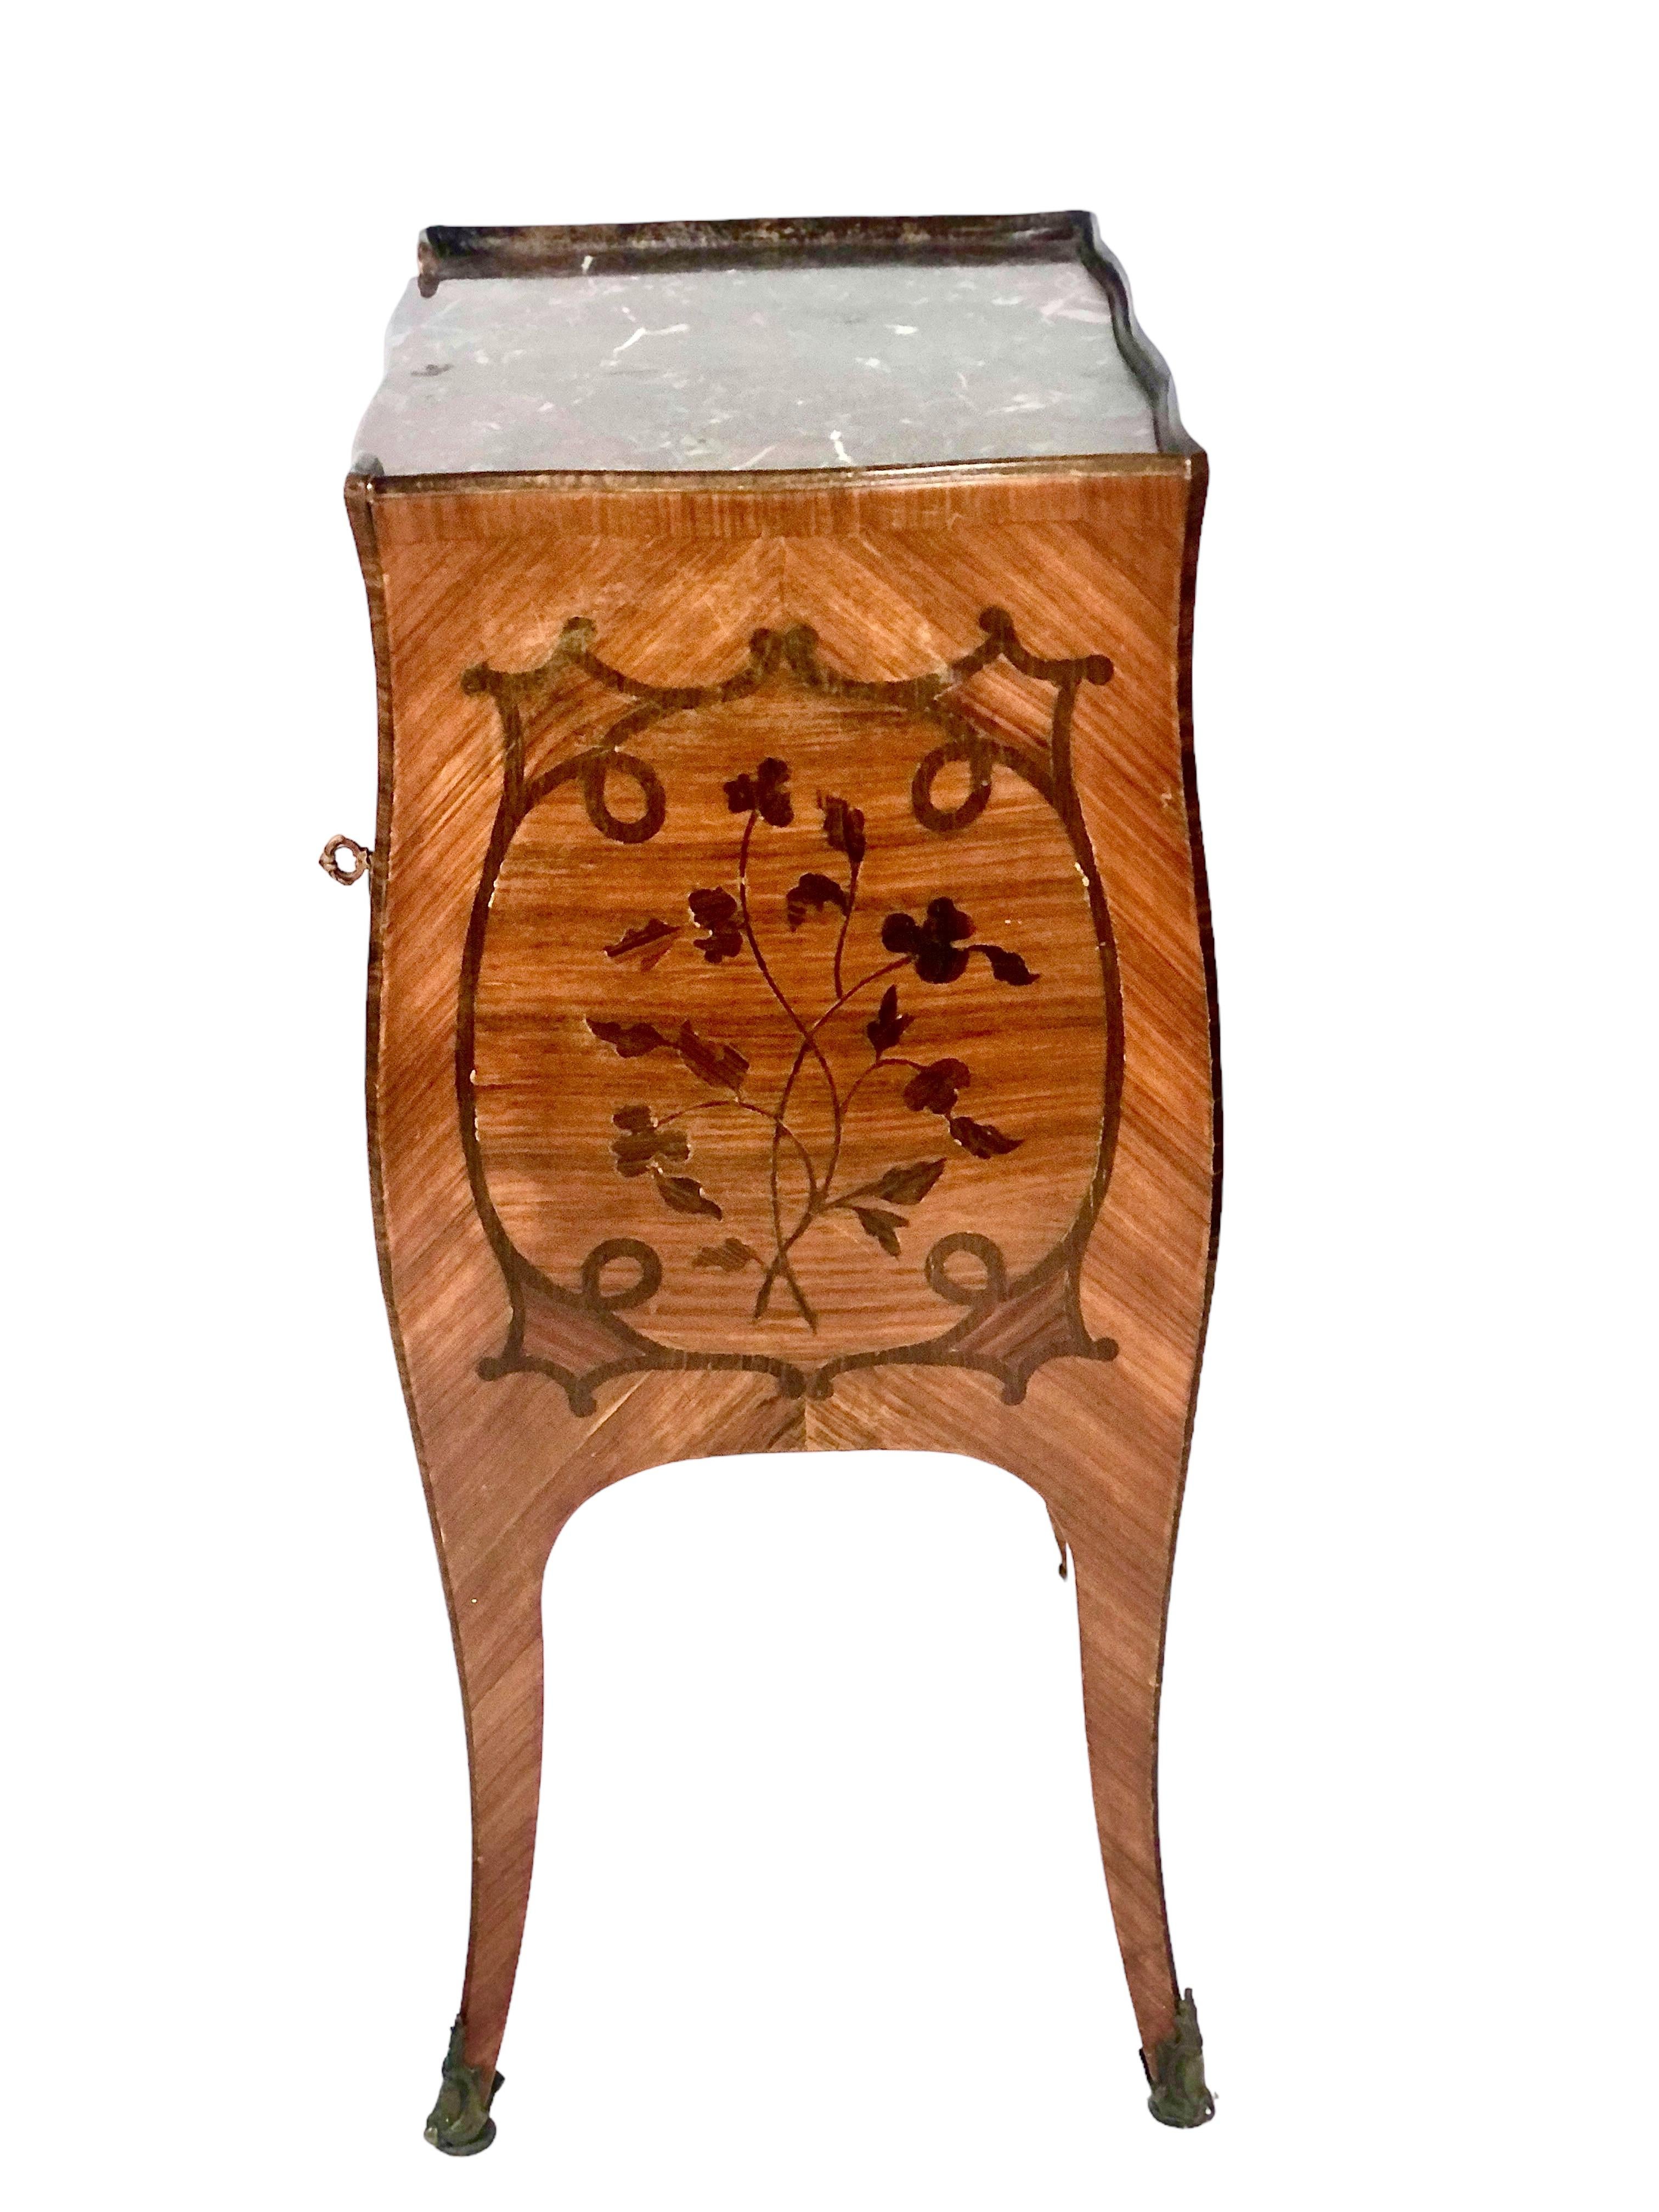 A fine, Parisian Louis XV style, marquetry-inlaid rosewood bedside table, featuring four curved sides and gently tapering legs. Fitted with fine gilt bronze escutcheons and mounts, and retaining the original dark red marble top, it has two small